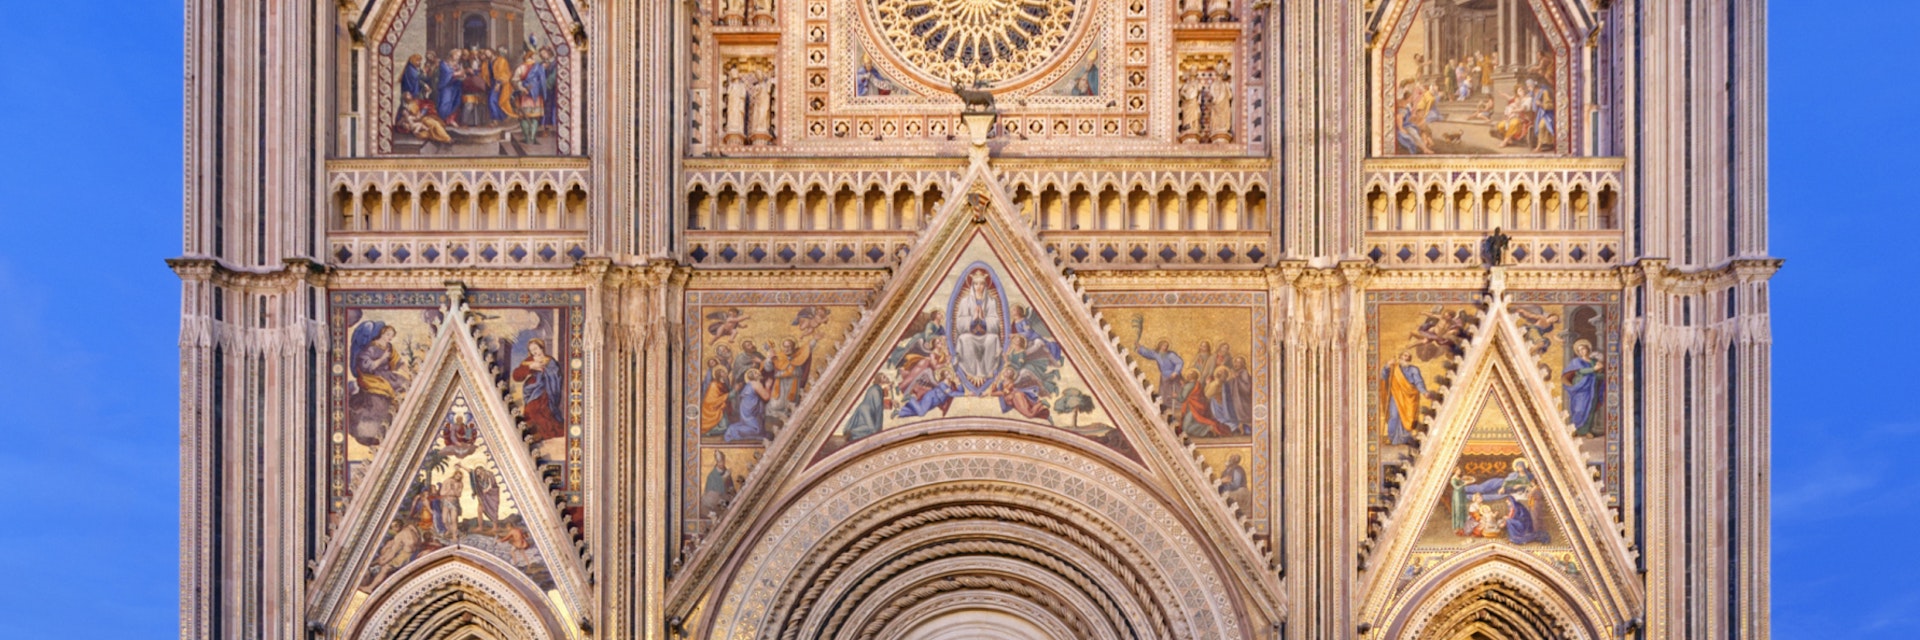 Facade of Orvieto Cathedral at dusk